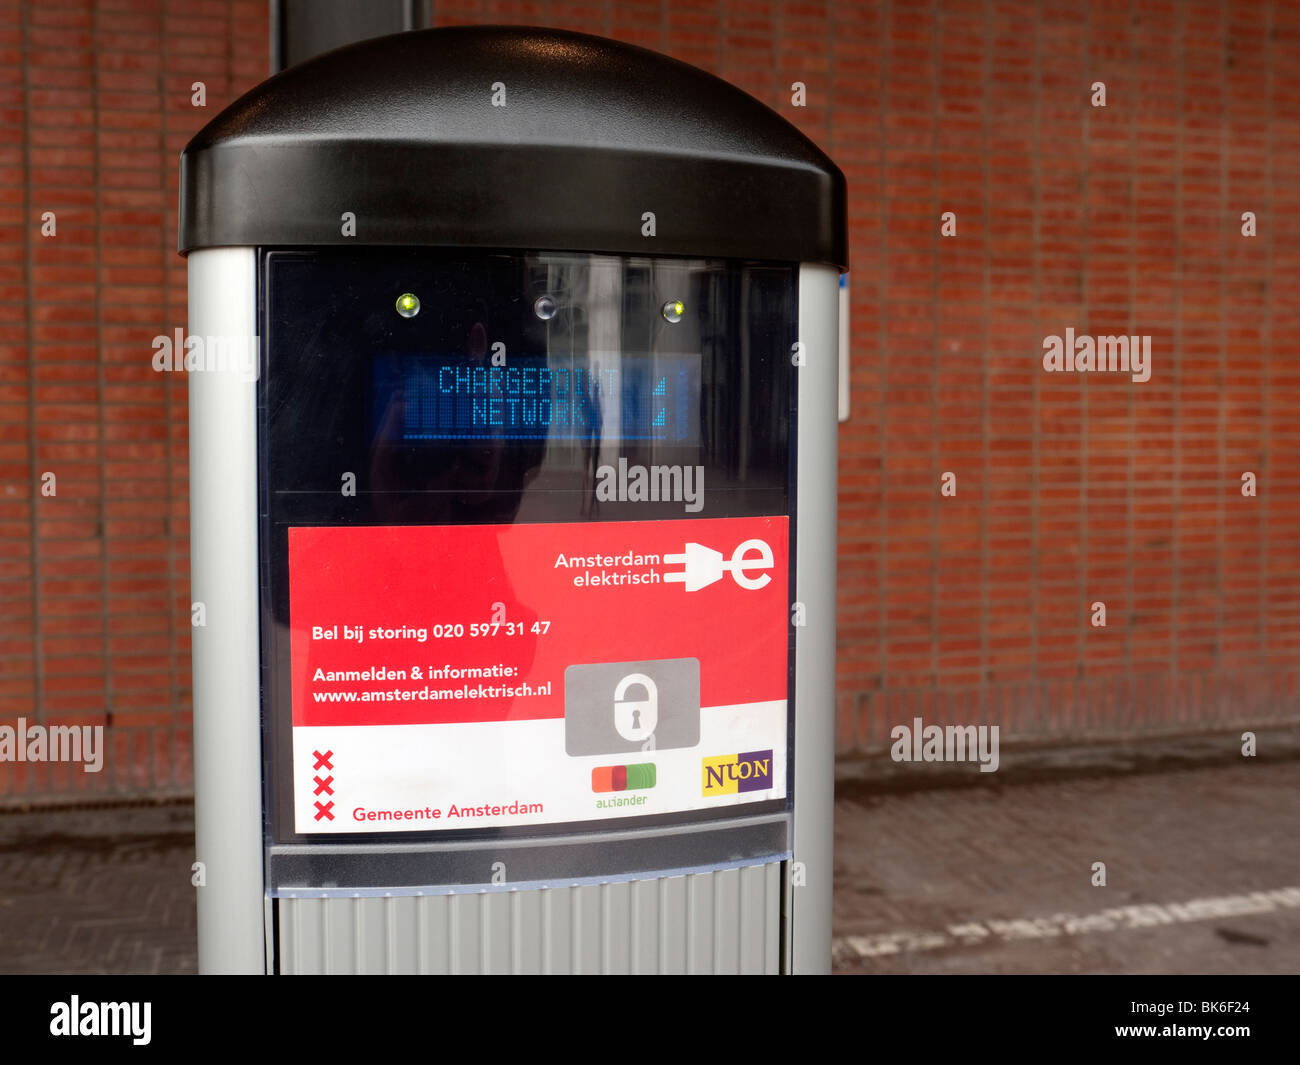 Charging point for recharging electric cars in central Amsterdam The Netherlands Stock Photo